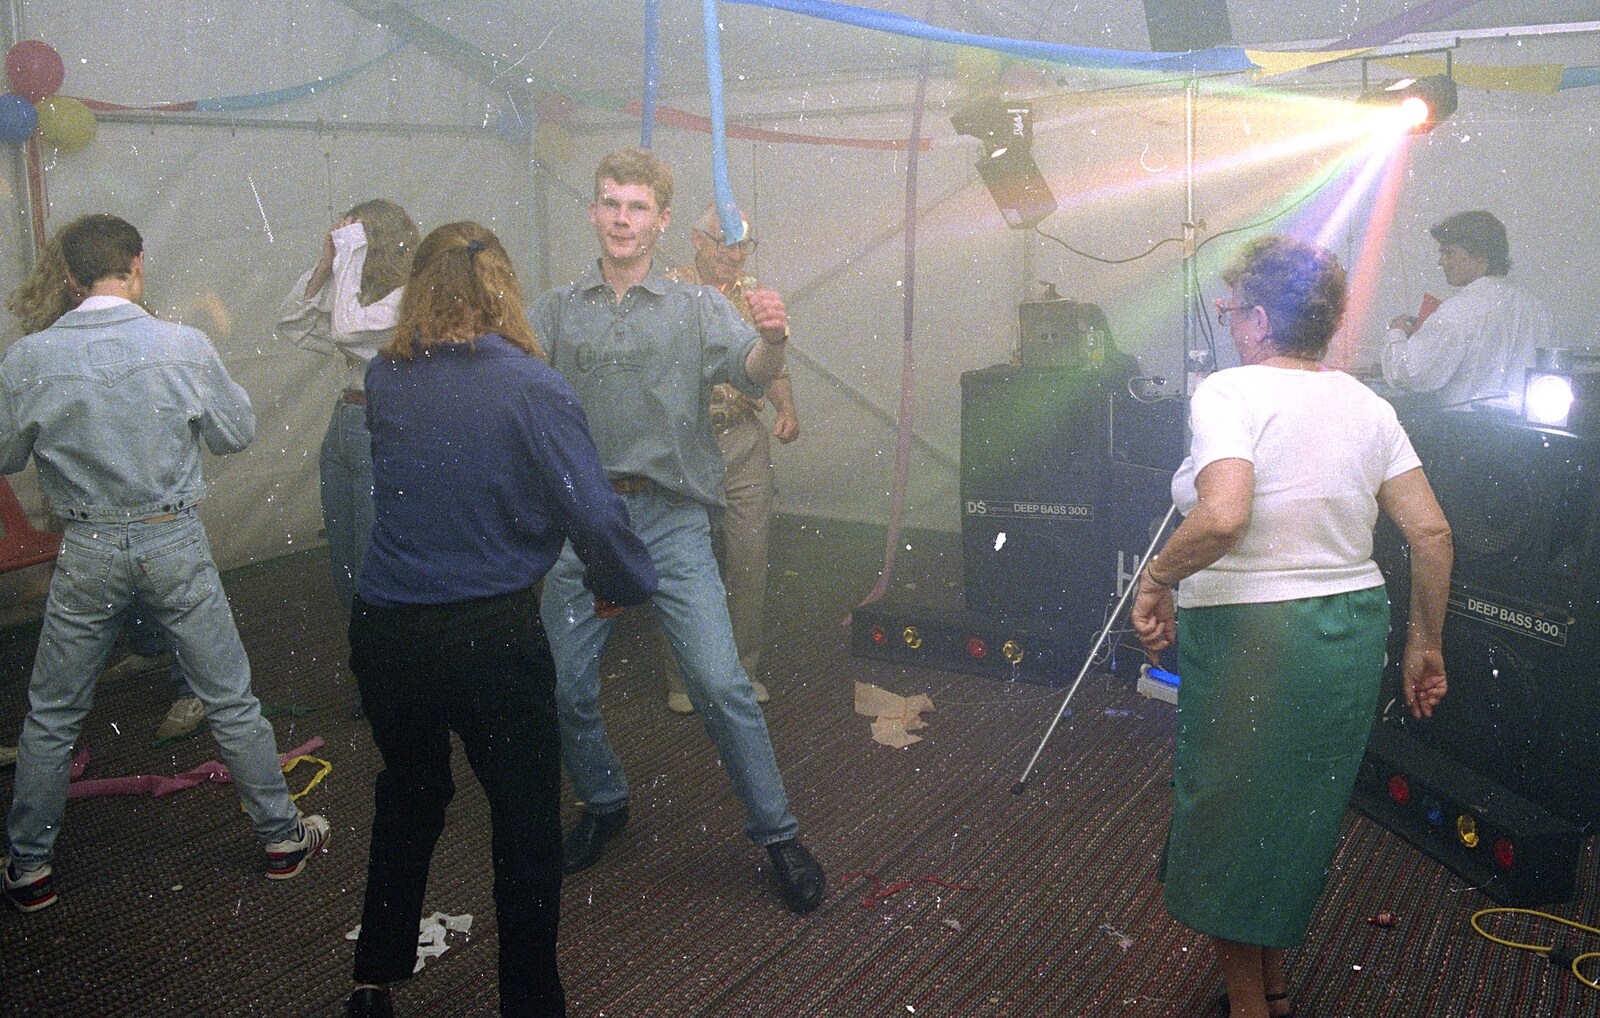 Andy busts some moves from Claire's Eighteenth Birthday, The Swan Inn, Brome, Suffolk - 11th June 1994